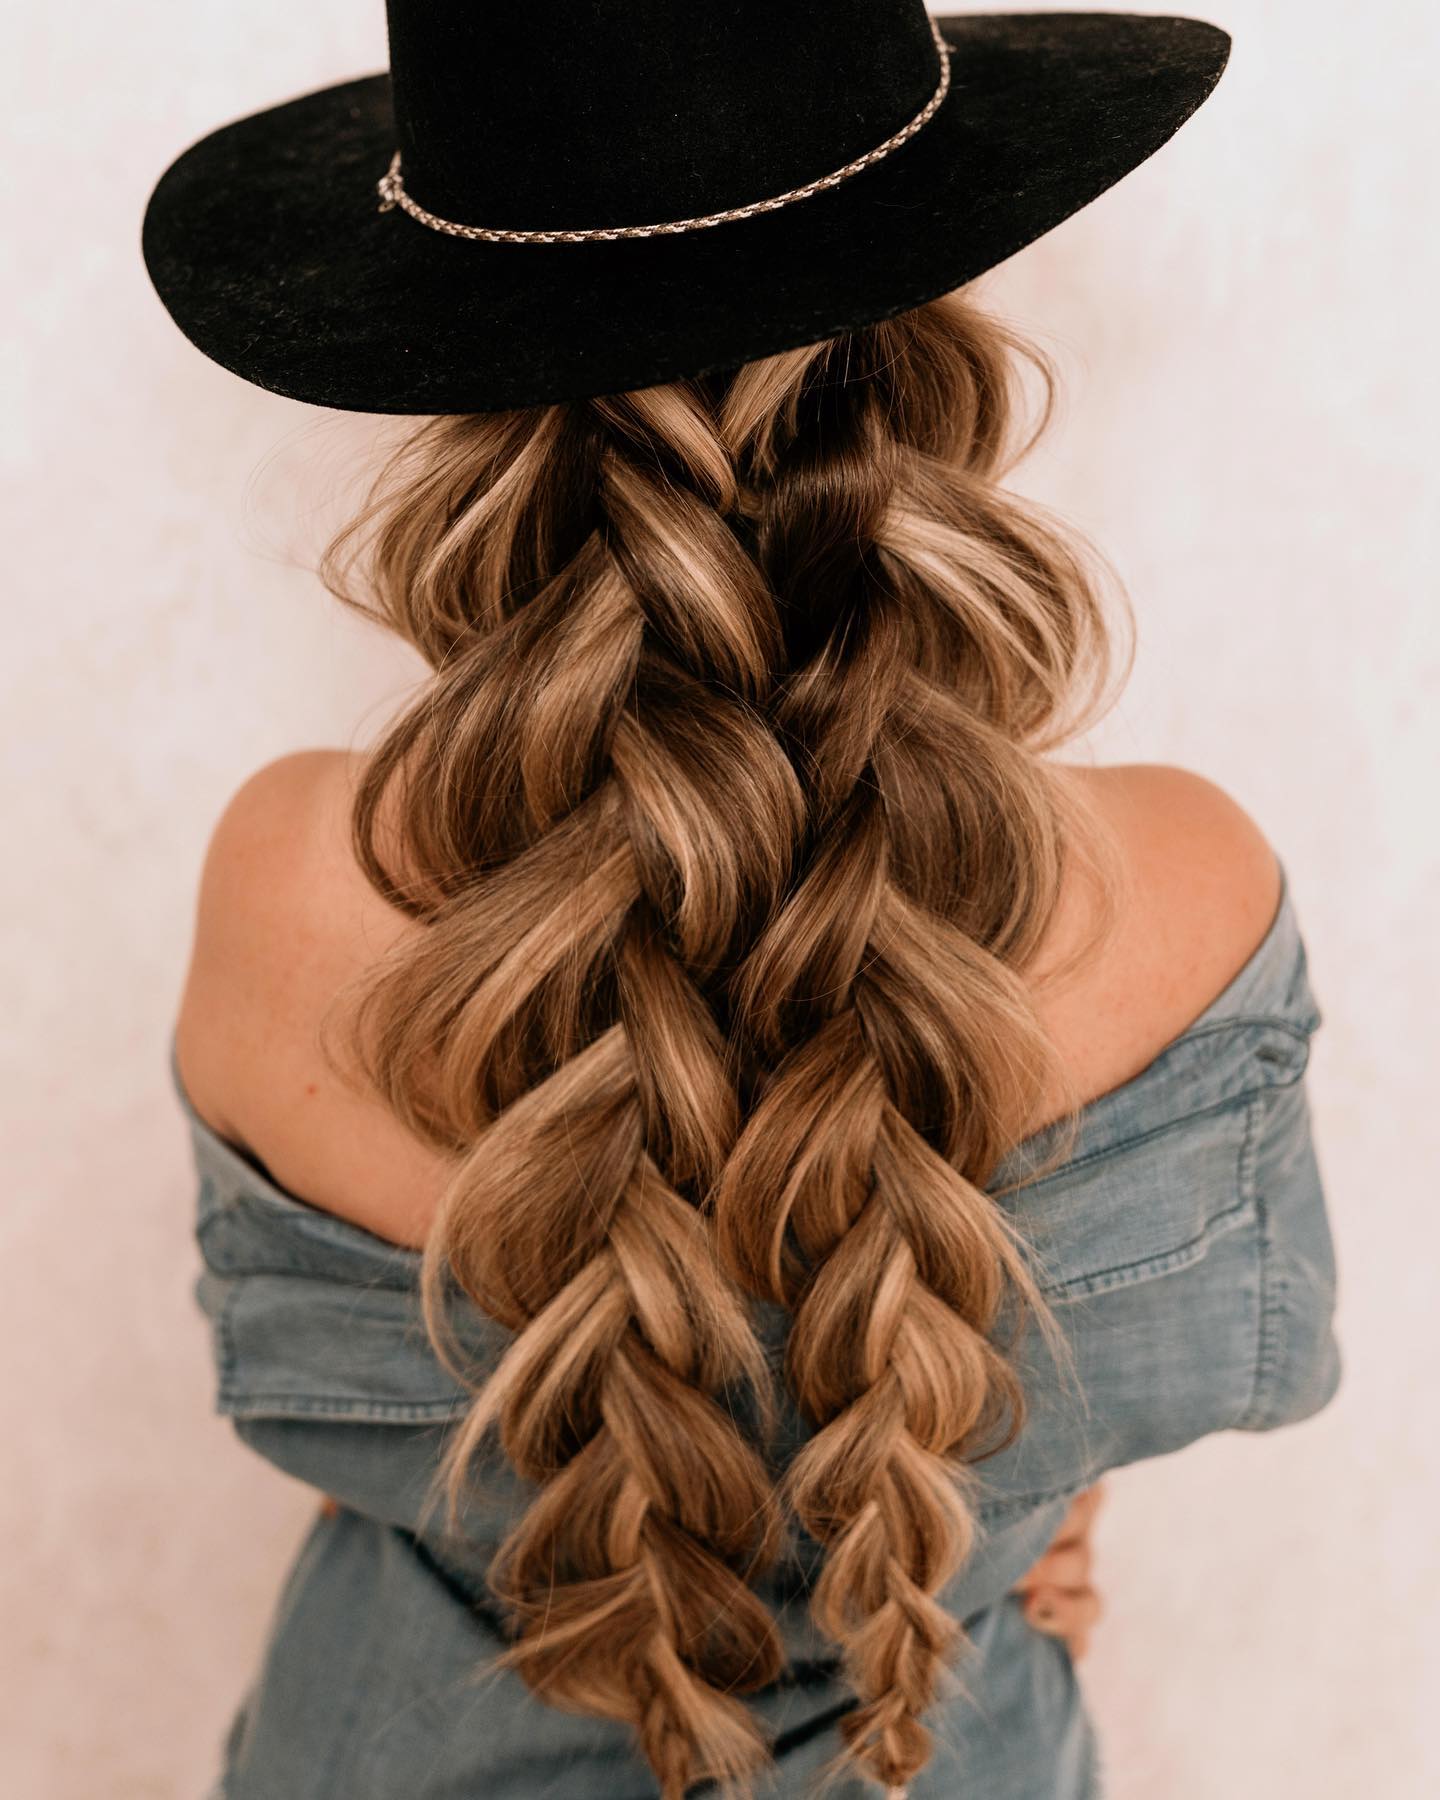 15 Overnight Hairstyles To Try Out Tonight